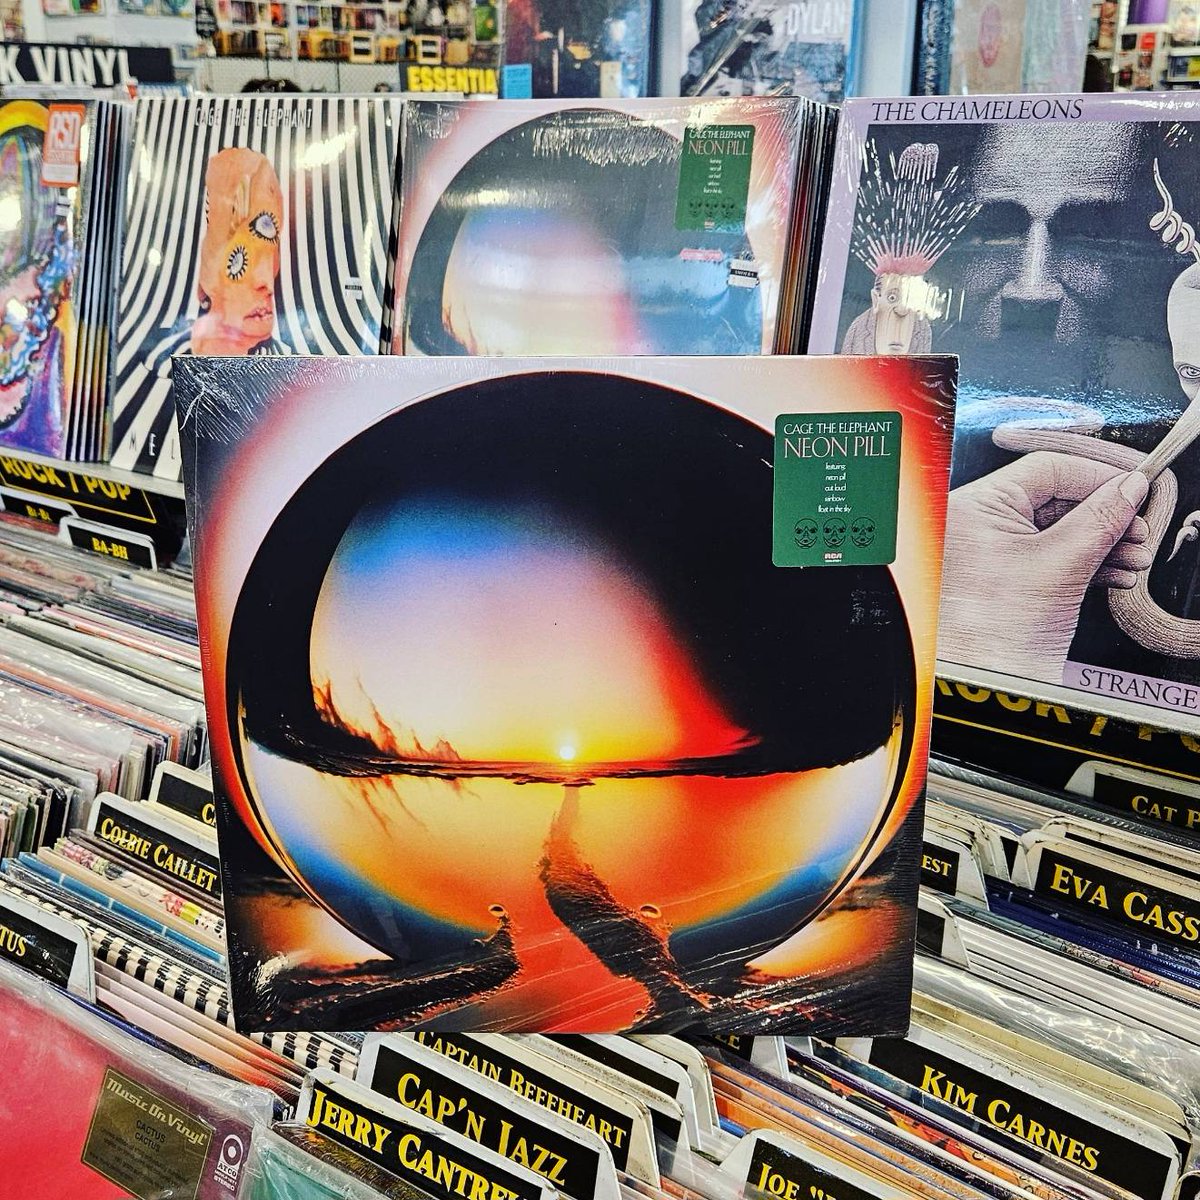 .@CageTheElephant just released their first new album since 2019! 'Neon Pill' is available now on CD and vinyl via @RCARecords. Get it here: bit.ly/2vmosV1